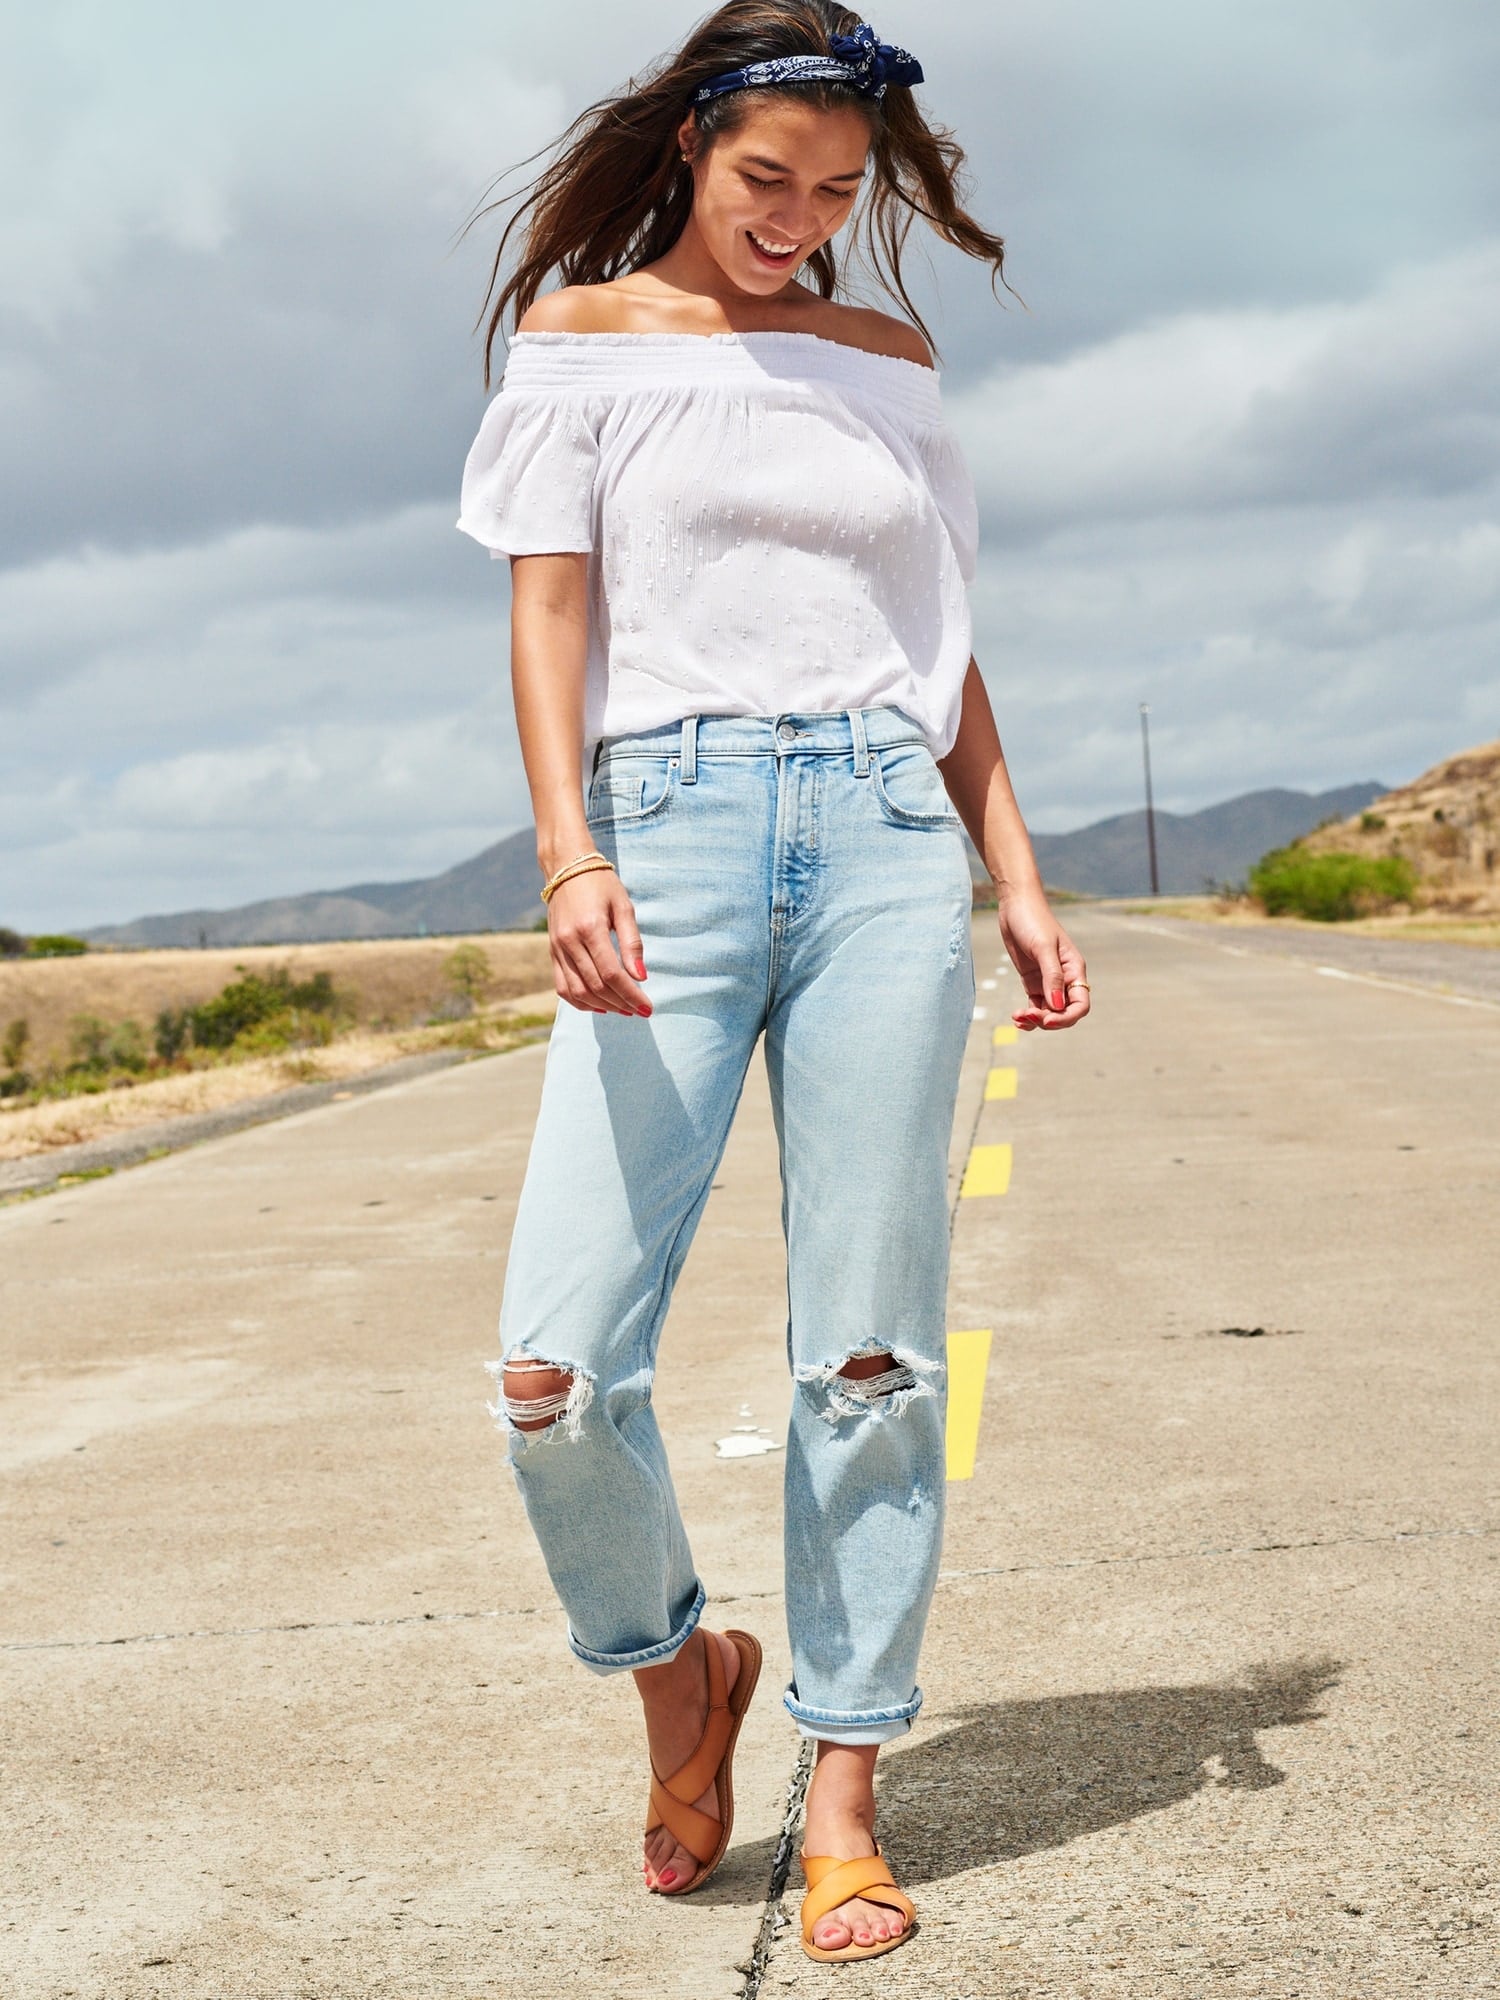 old navy women's ripped jeans